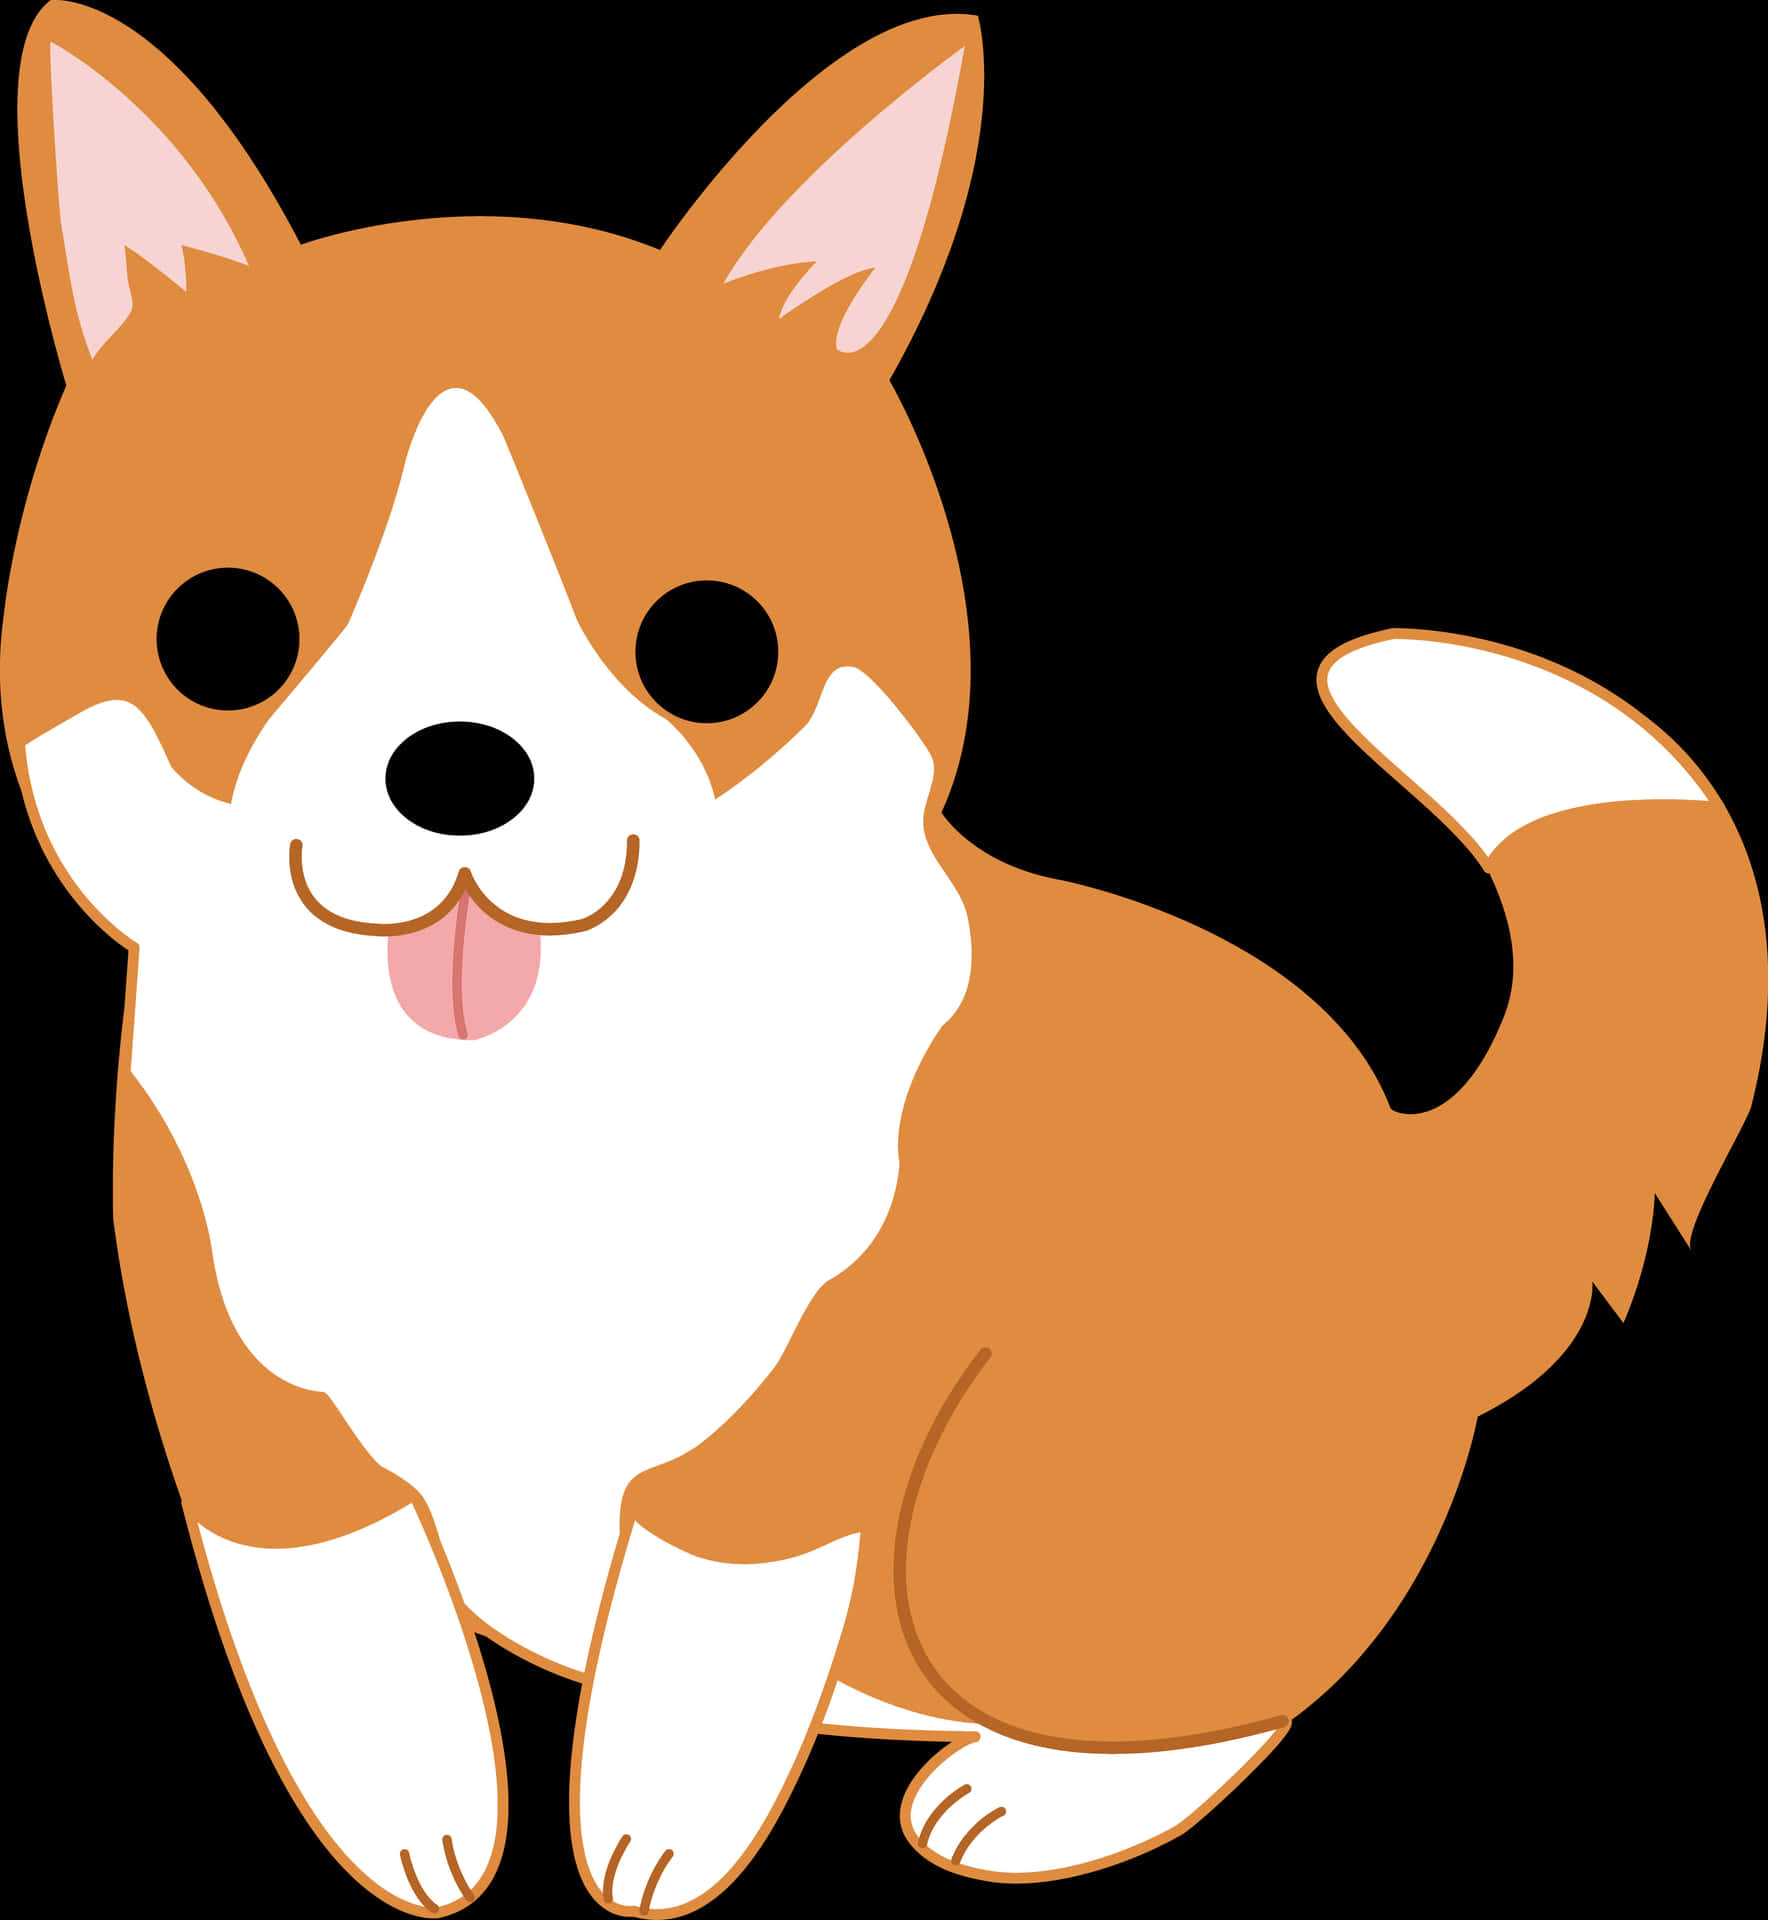 Cute Cartoon Dog With Tongue Out Wallpaper